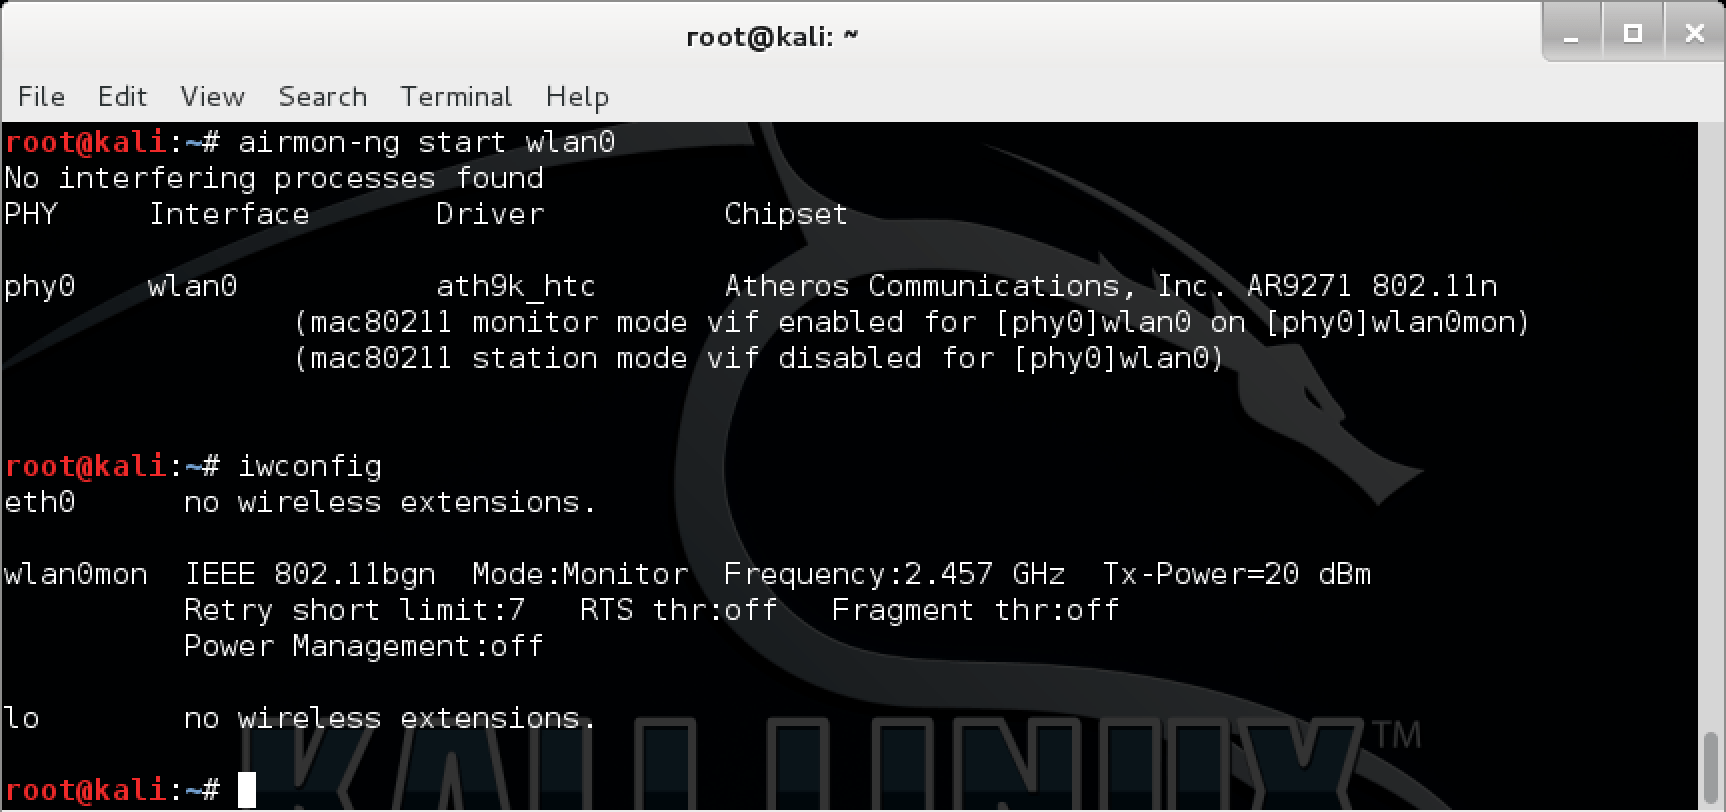 Pixiewps, Reaver & Aircrack-ng Wireless Penetration Testing Tool Updates | Kali Linux Blog